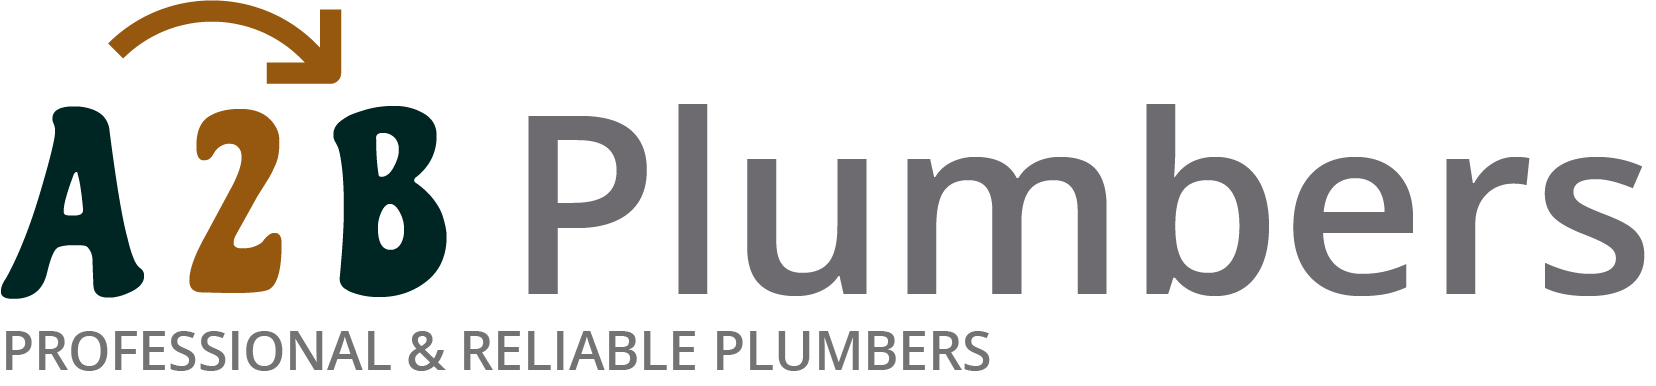 If you need a boiler installed, a radiator repaired or a leaking tap fixed, call us now - we provide services for properties in Cudham and the local area.